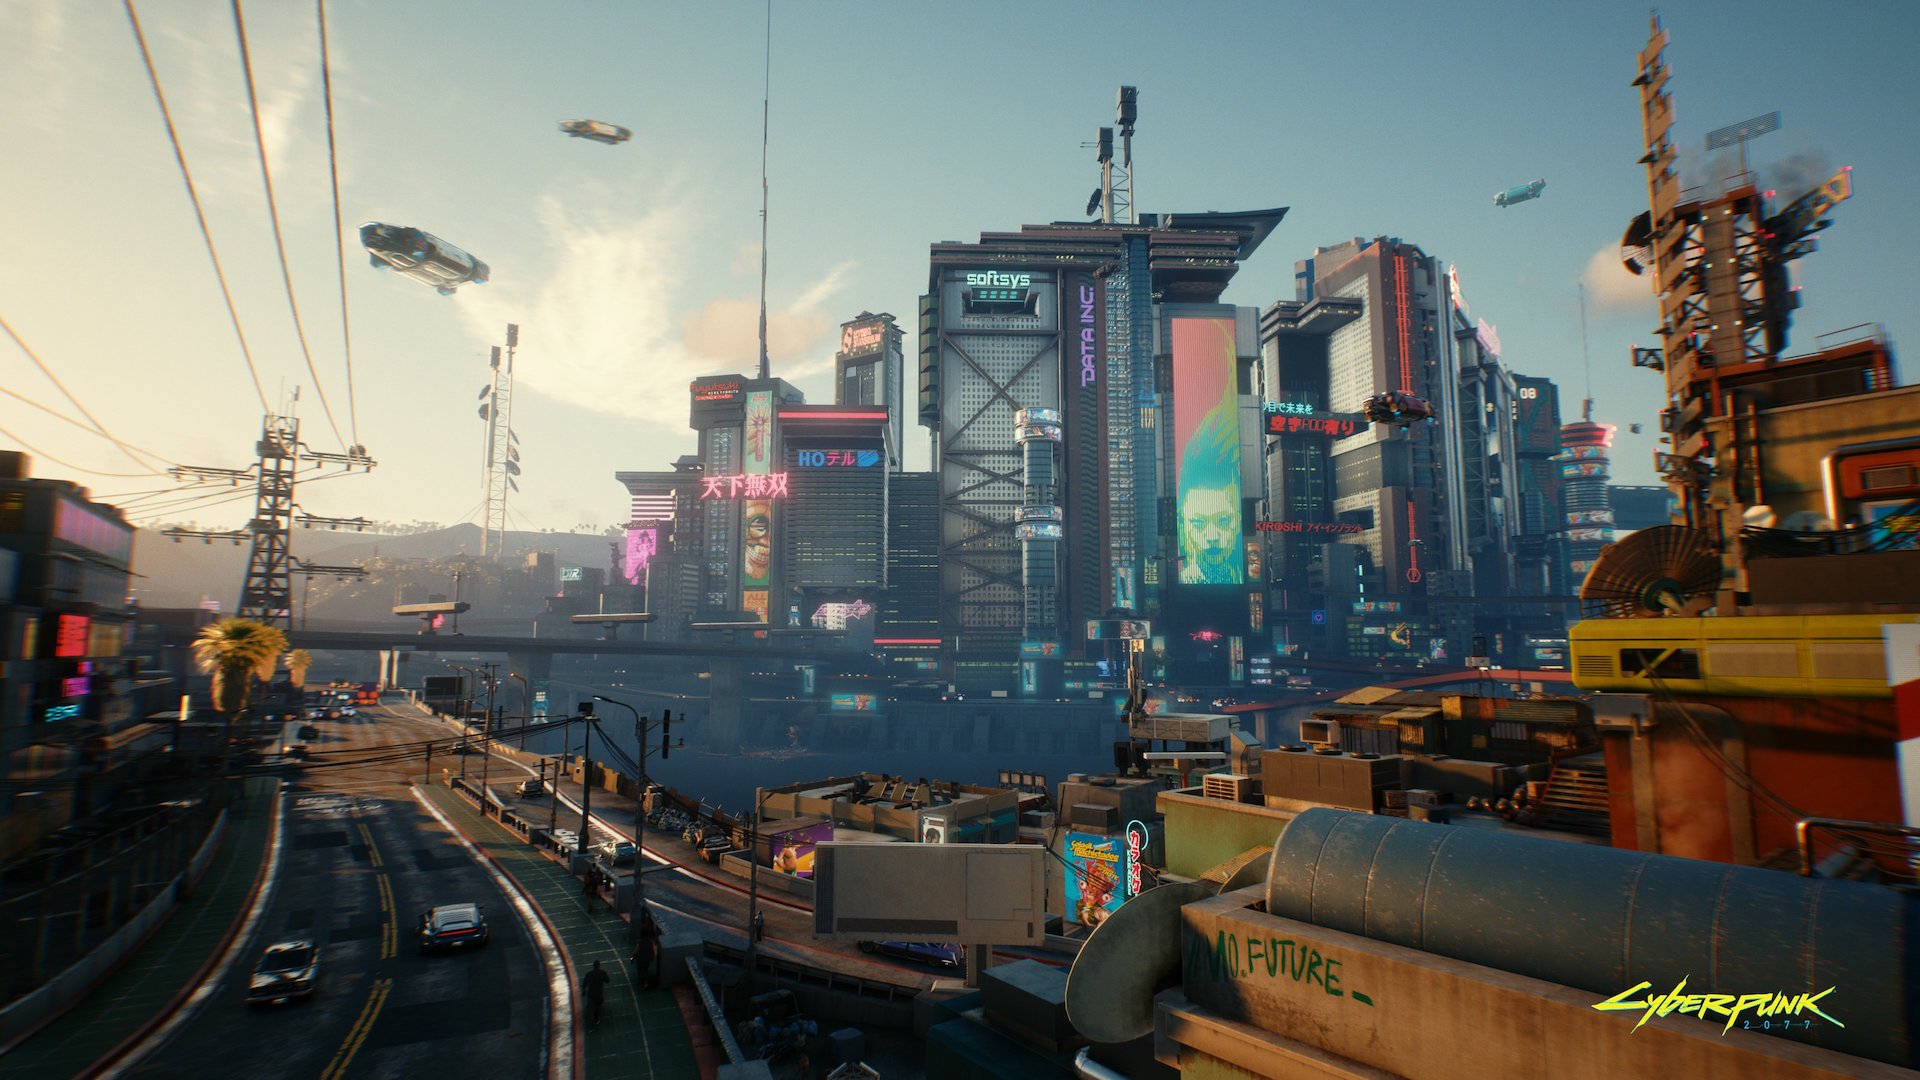 Cyberpunk 2077 Trailer Shows Off Ray Tracing On The New Geforce Rtx 30 Series